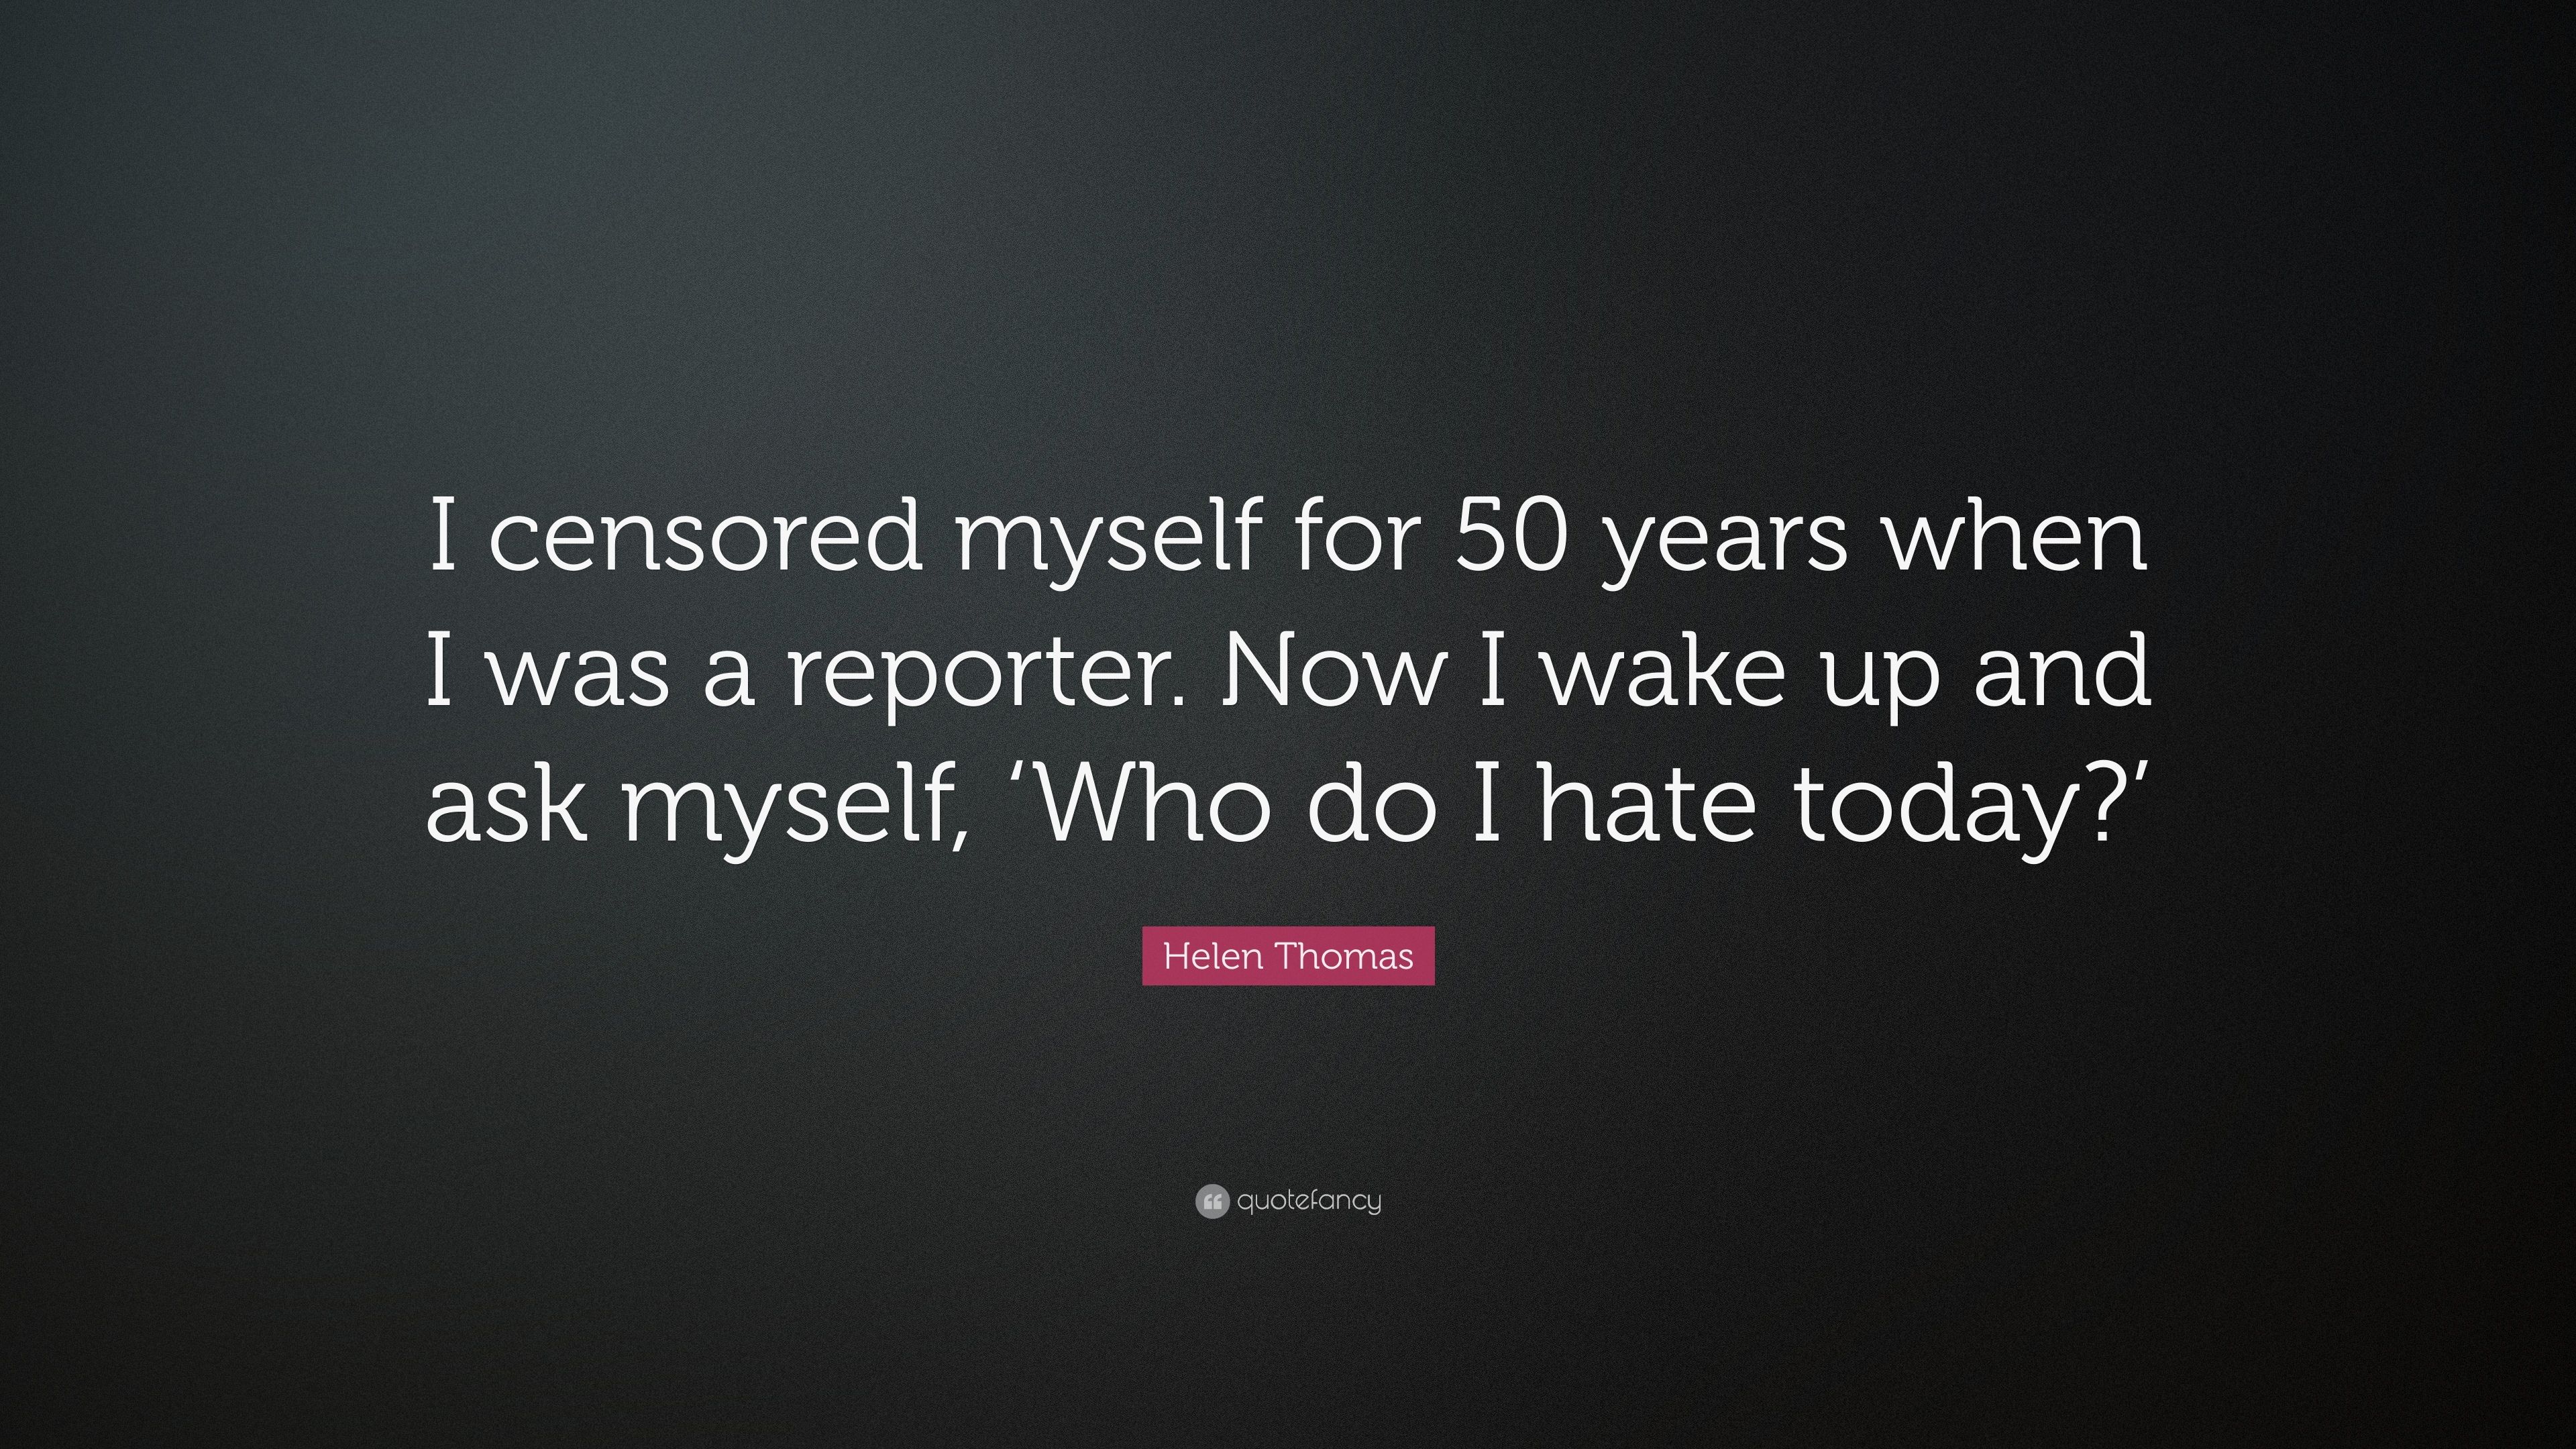 Helen Thomas Quote: “I censored myself for 50 years when I was a reporter. Now I wake up and ask myself, 'Who do I hate today?'” (7 wallpaper)